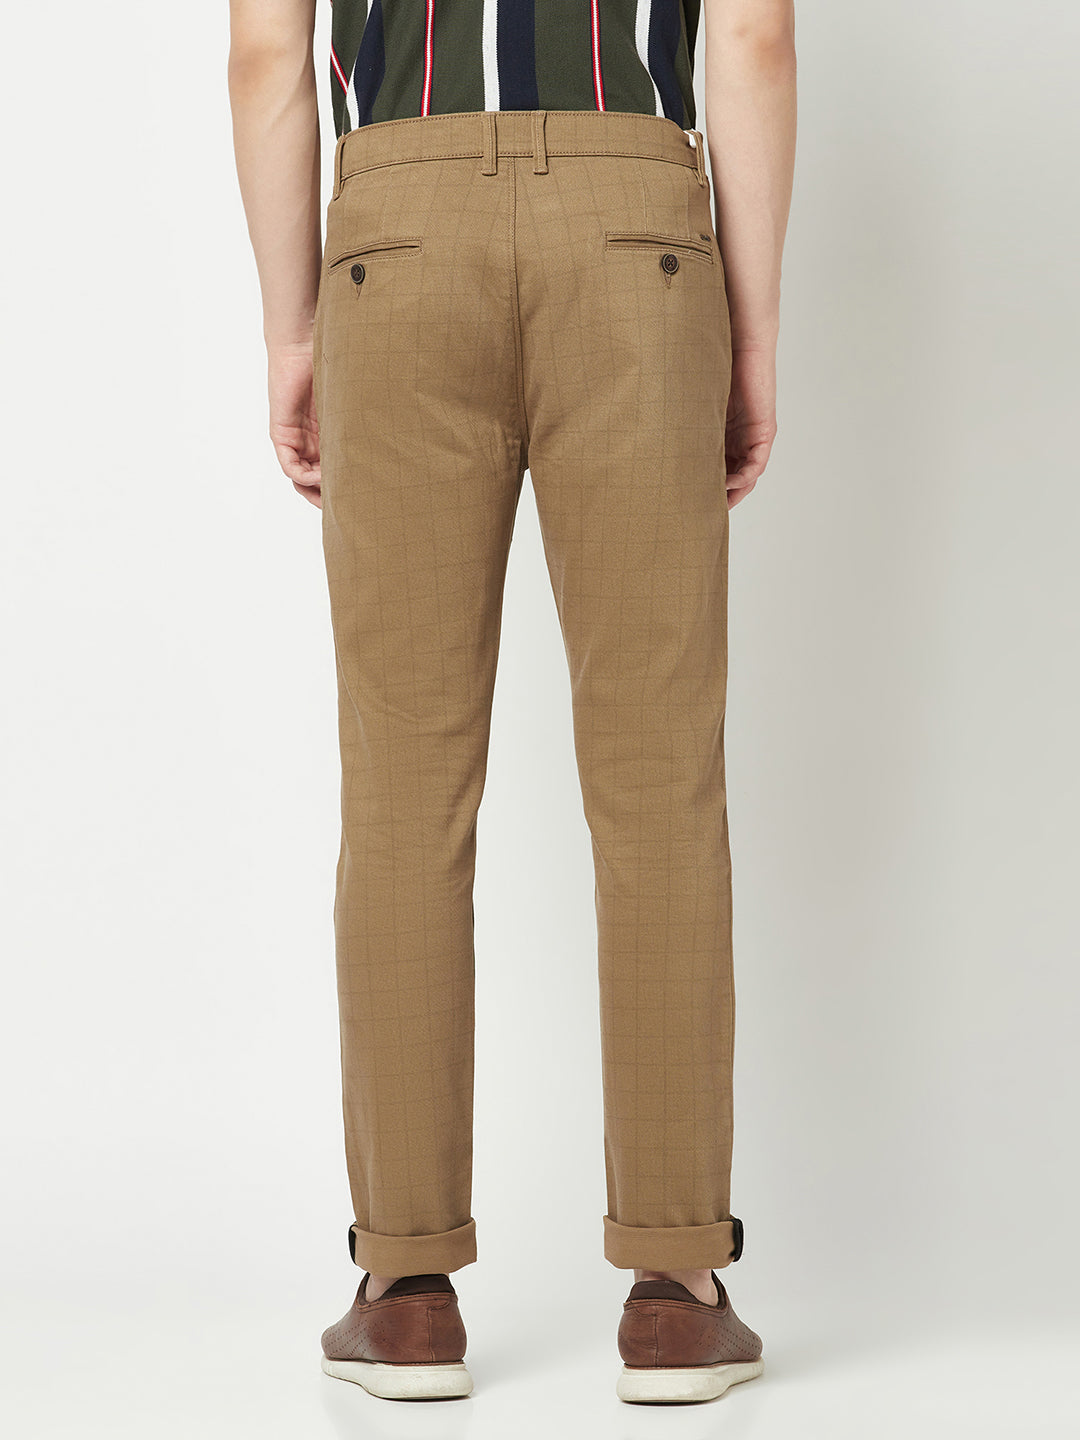  Checked Brown Trousers